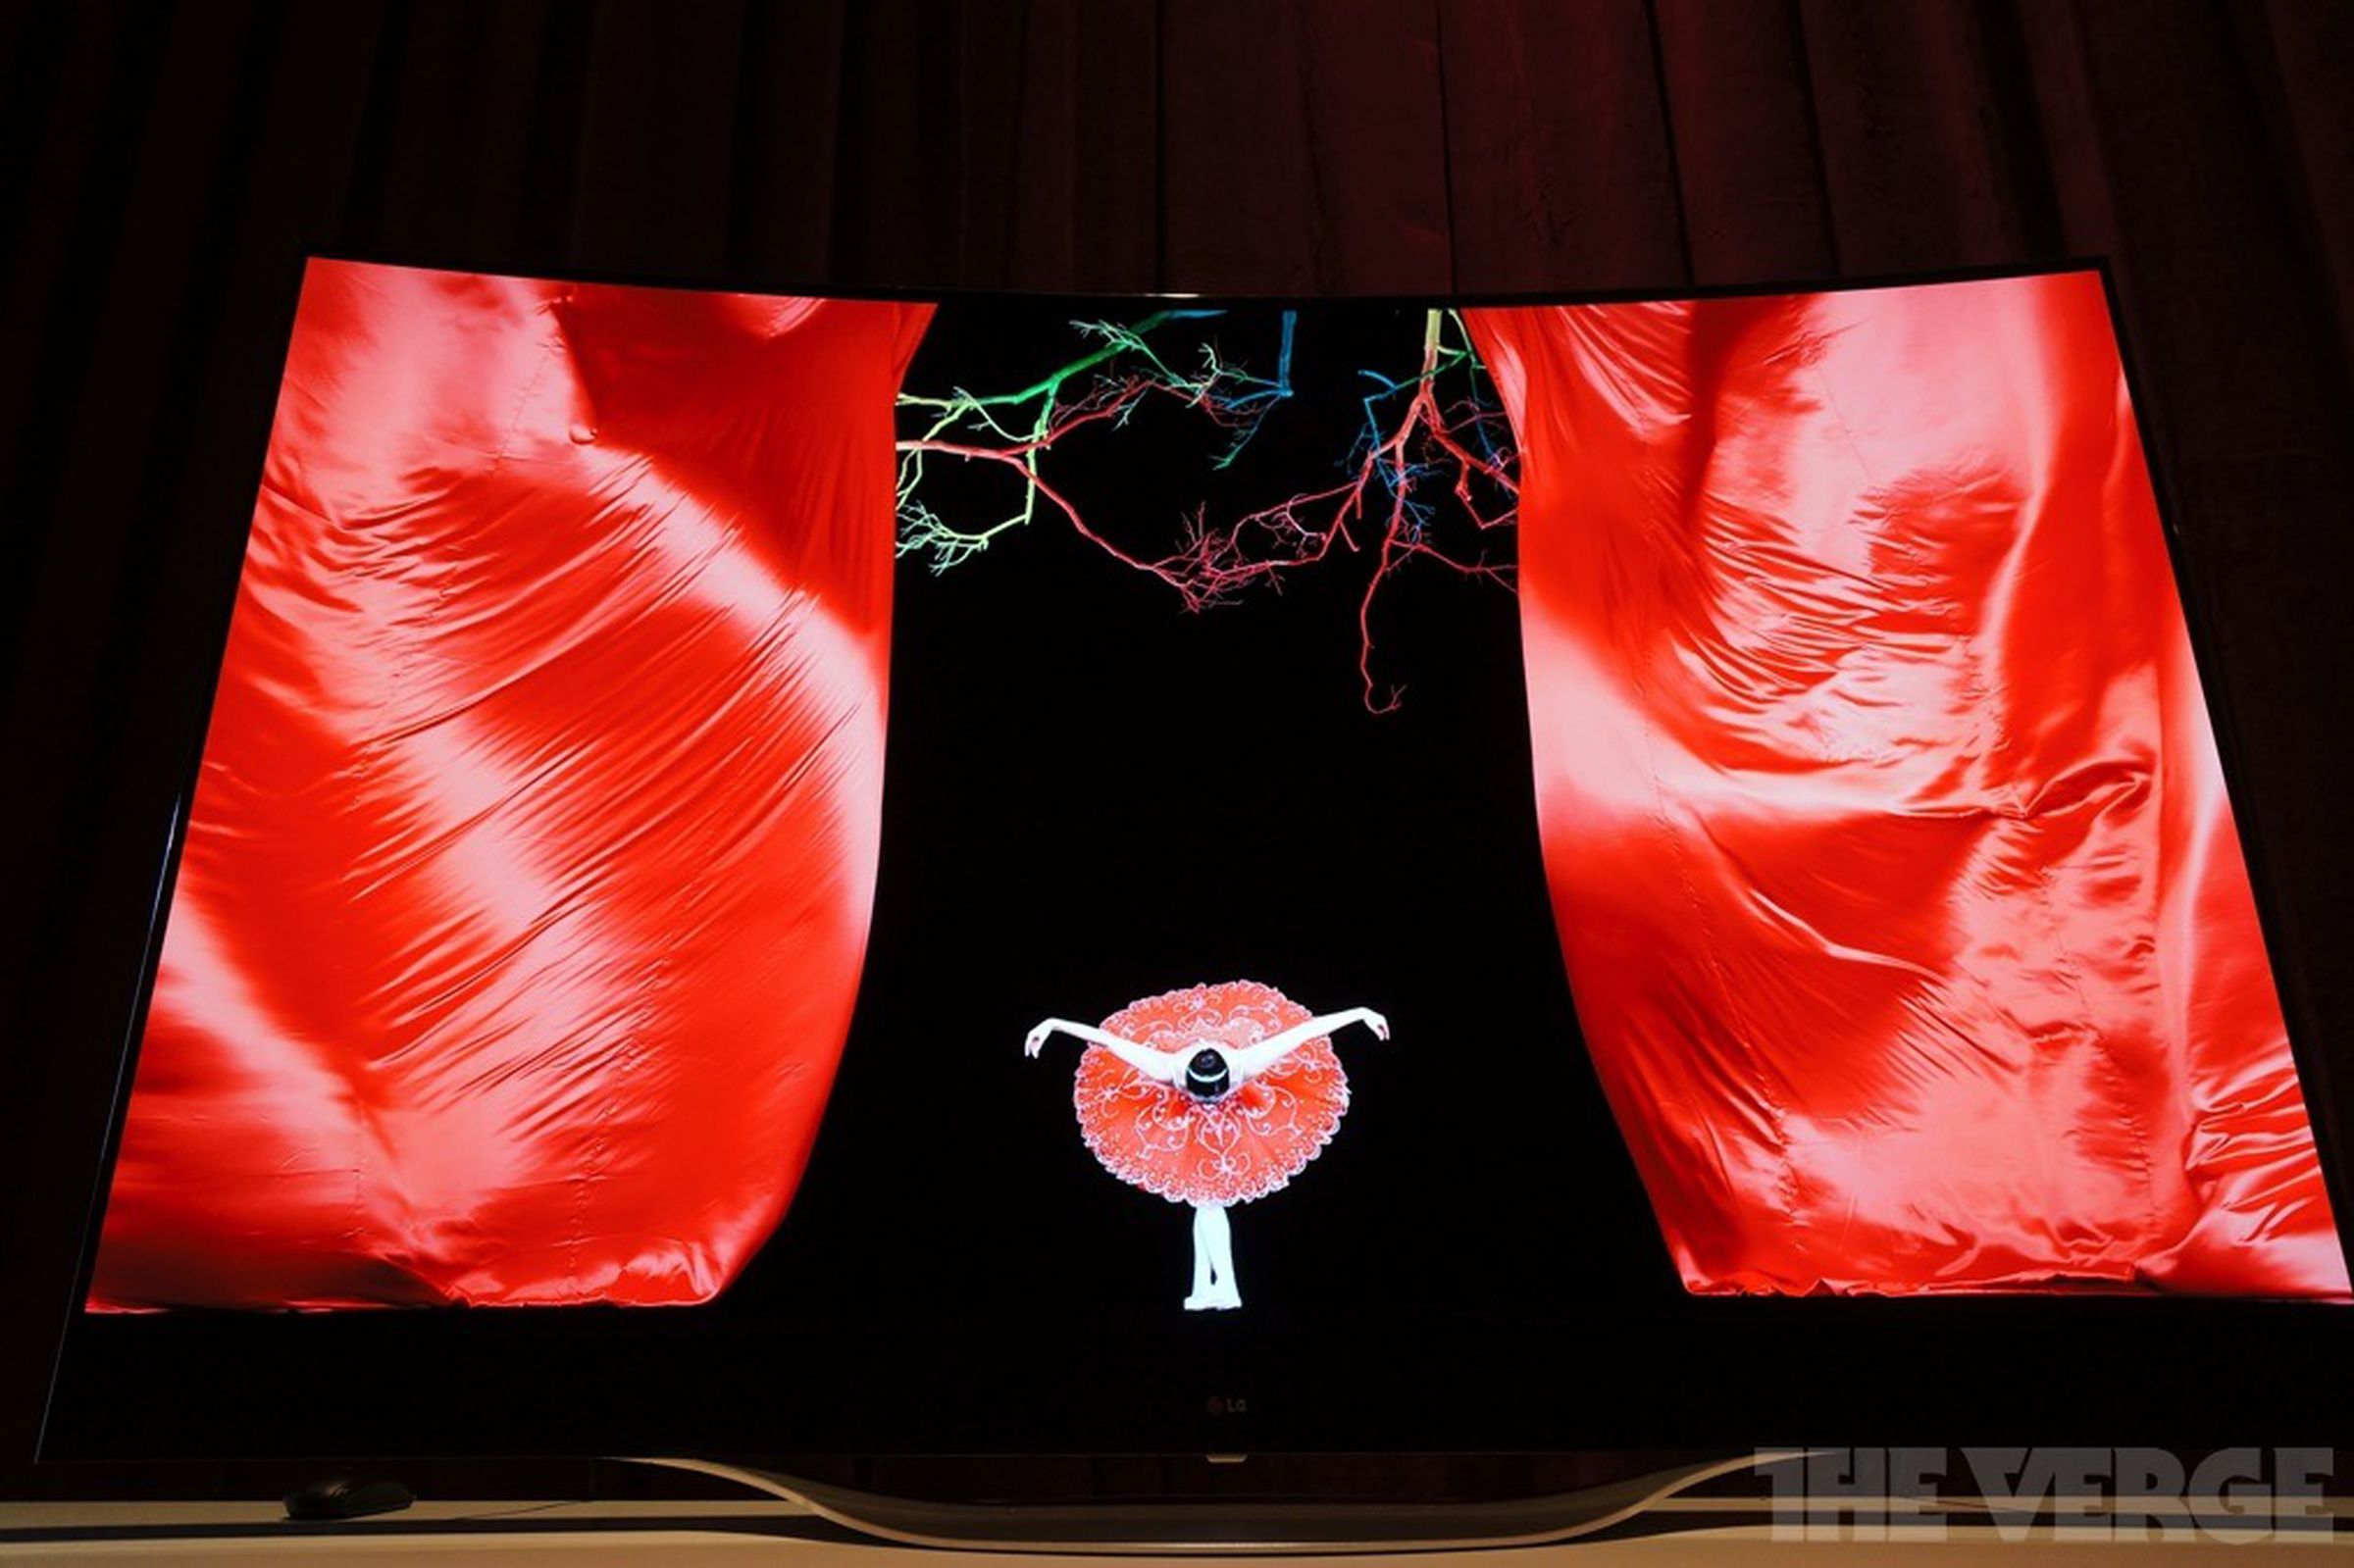 Gallery Photo: LG's 77-inch curved OLED TV